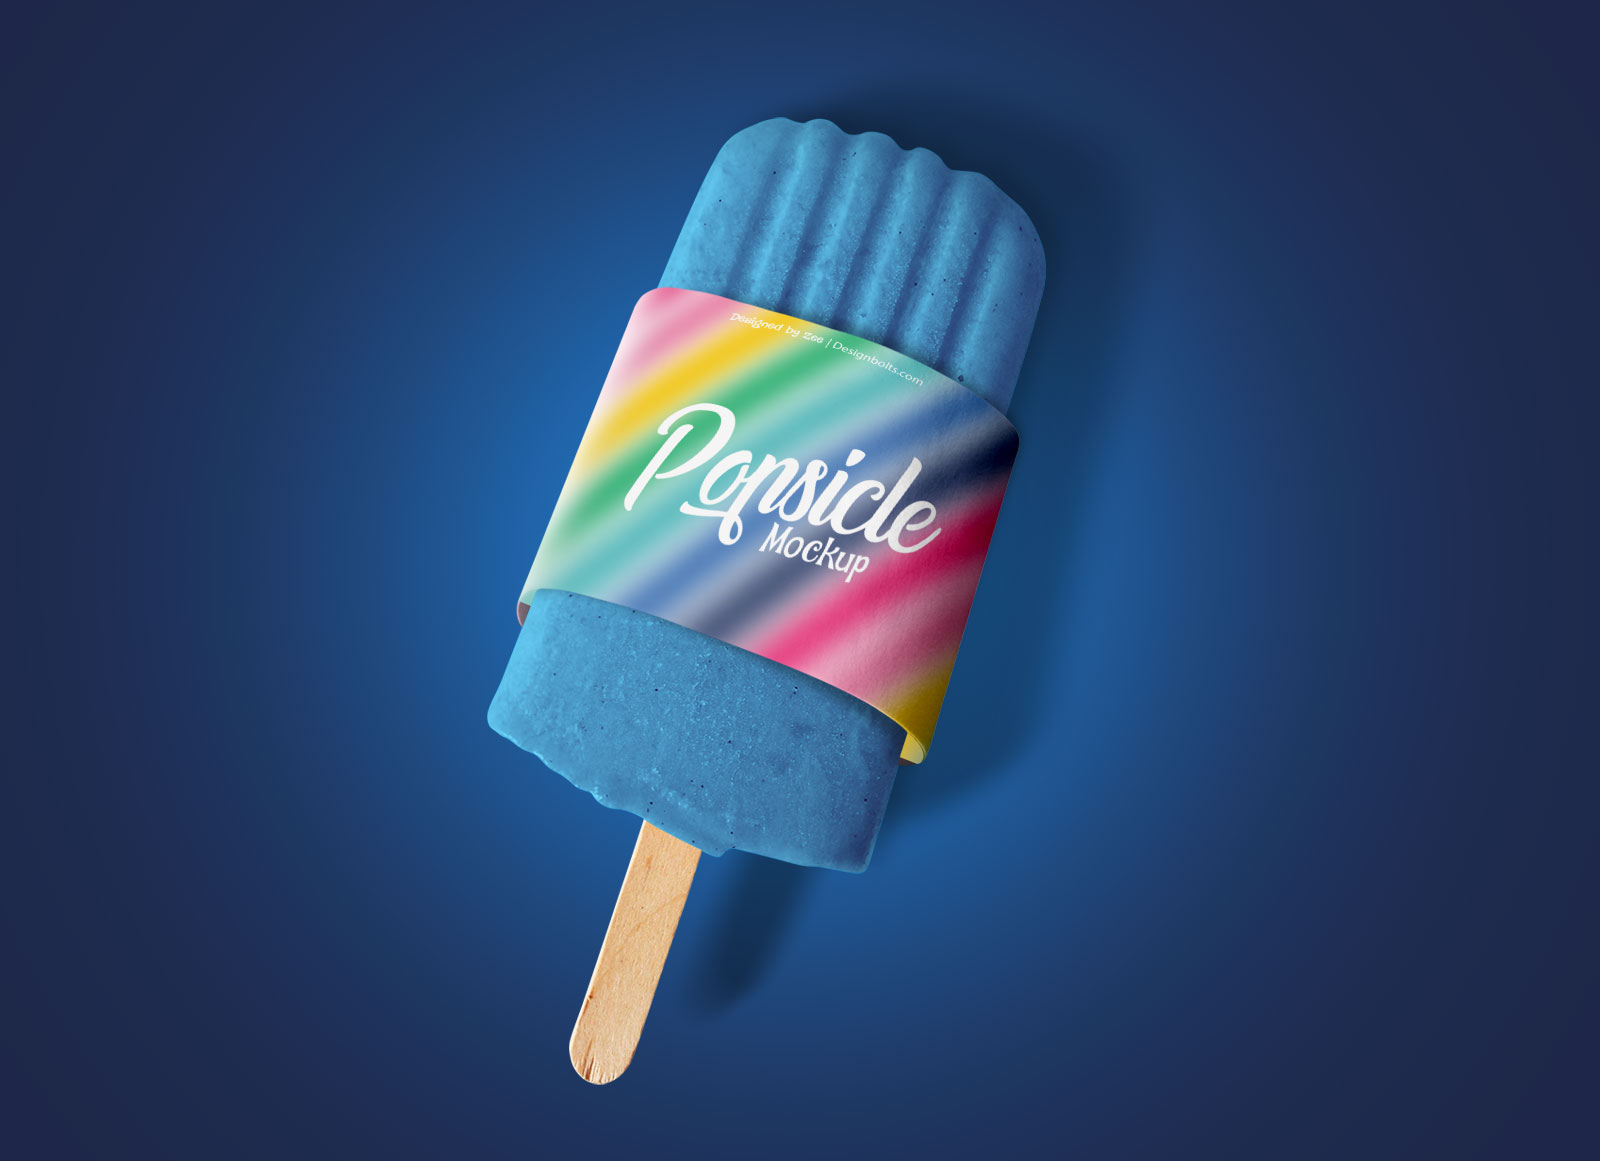 Popsicle Ice Ice Cream Packaging Mockup